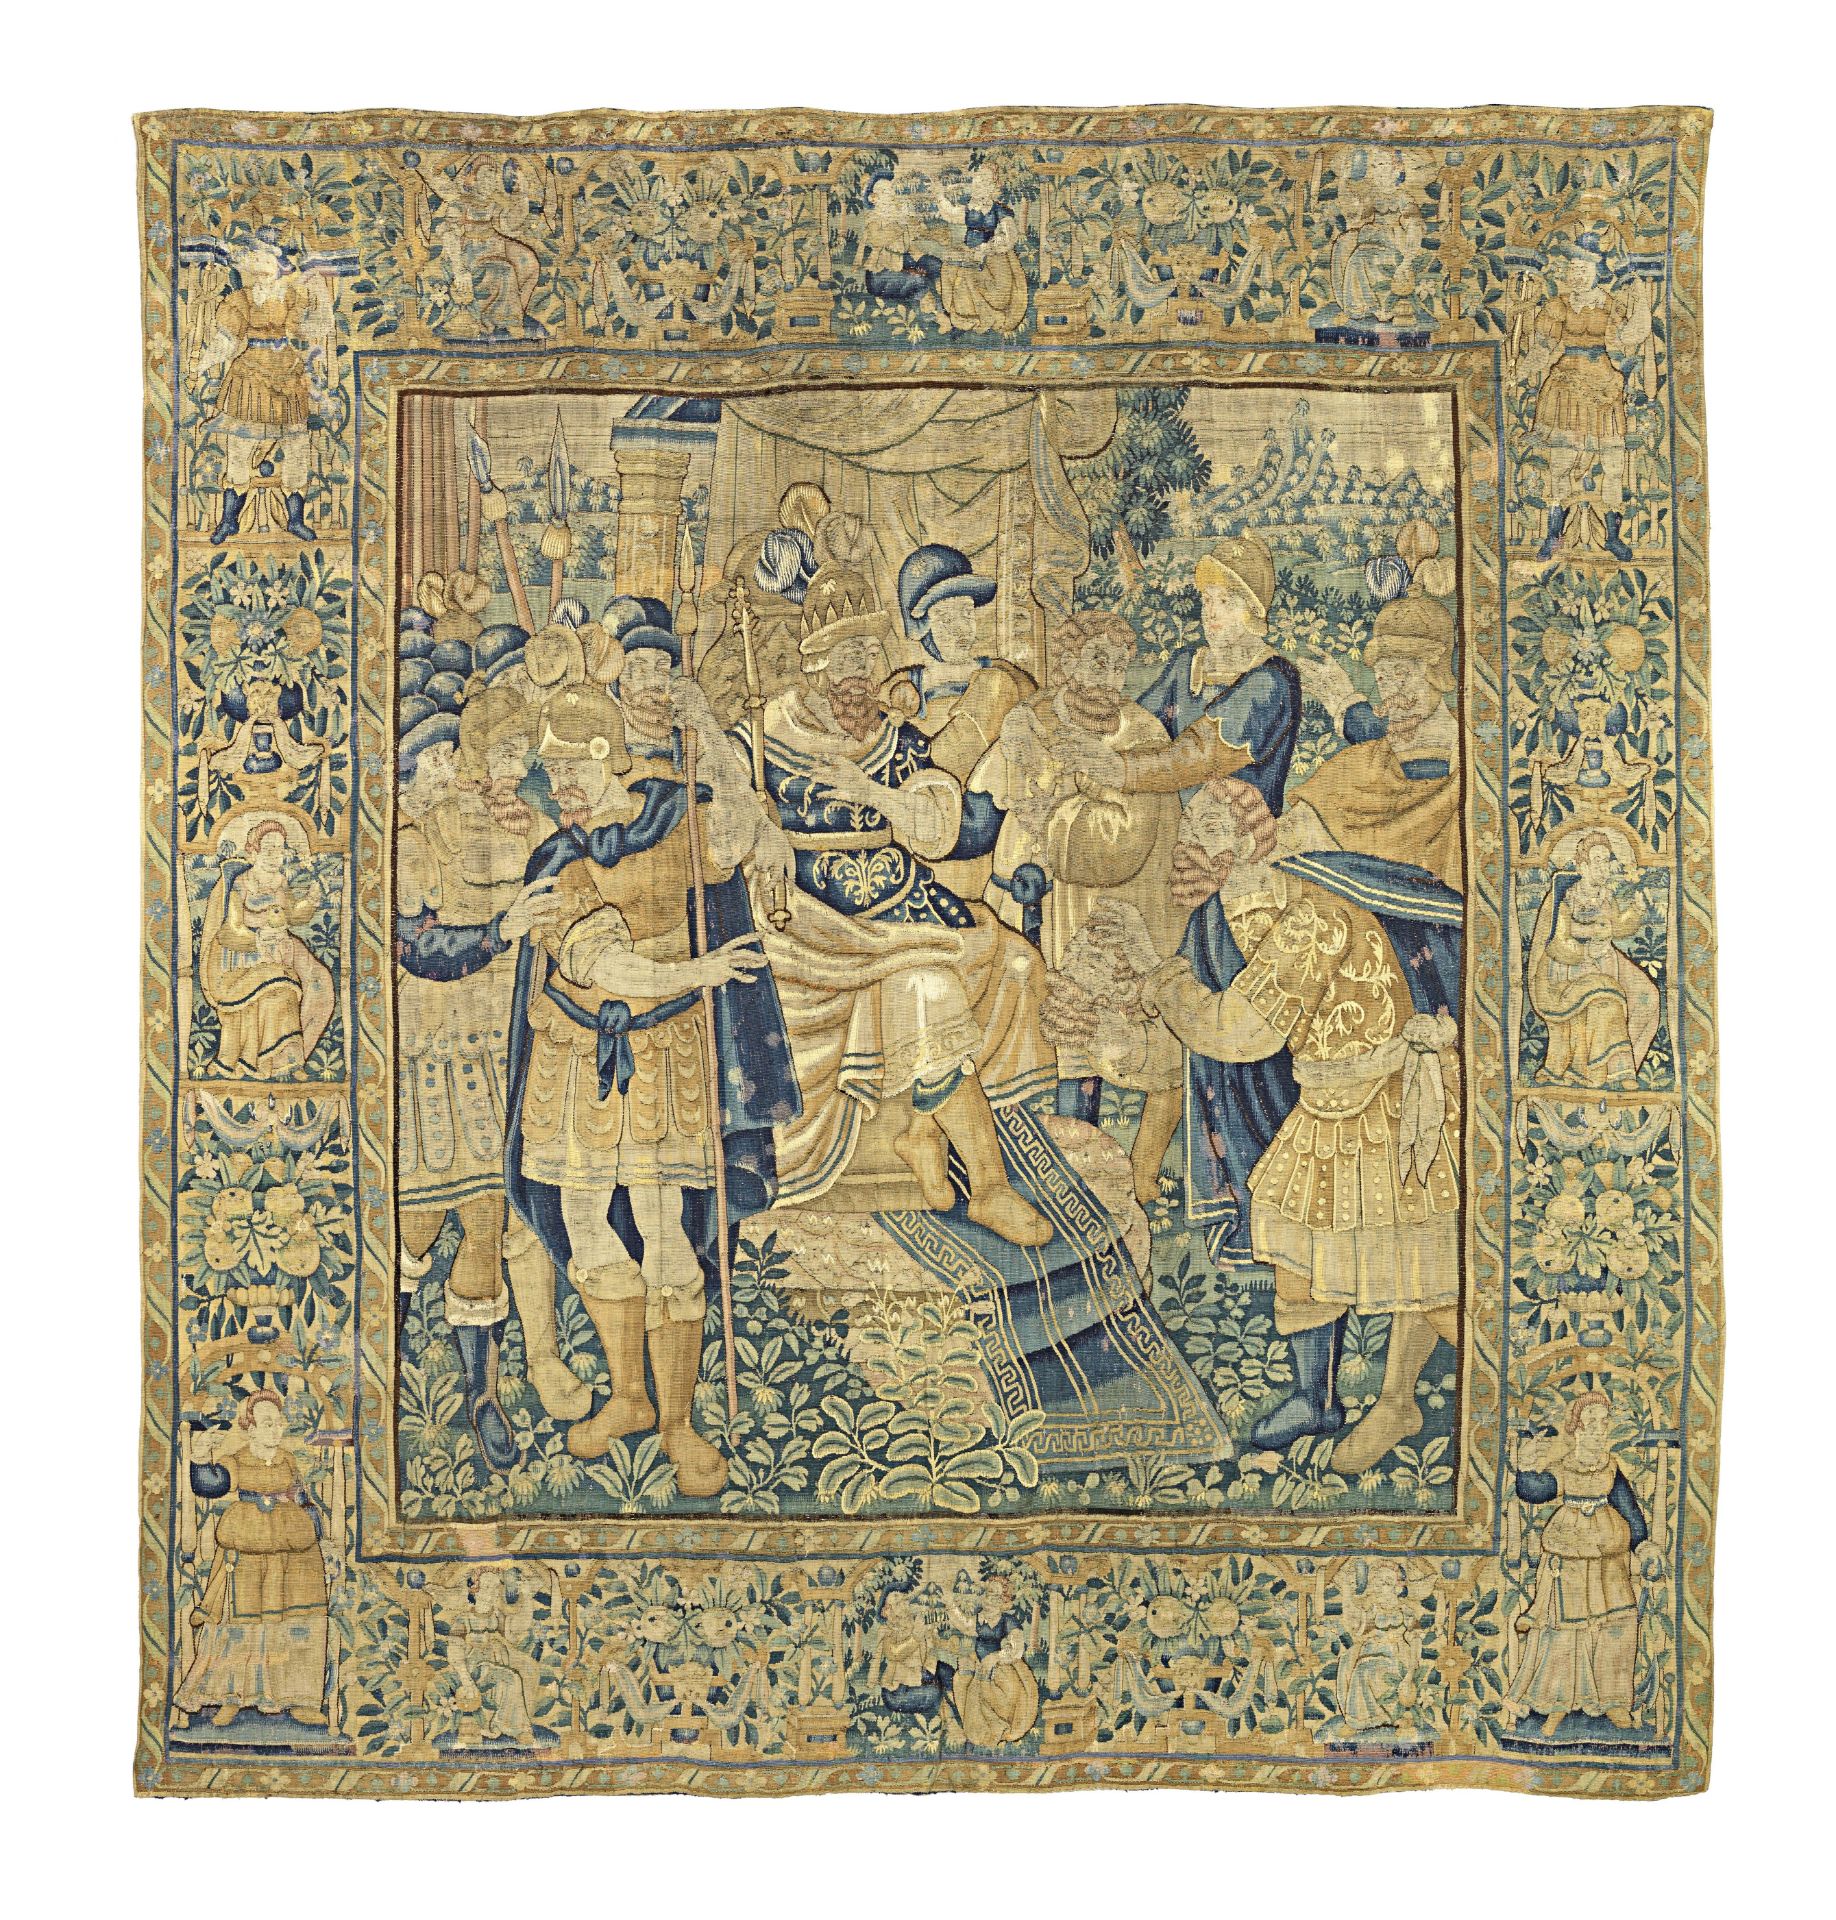 A striking Flemish late 16th century historical tapestry possibly Oudenaarde 335cm x 312cm